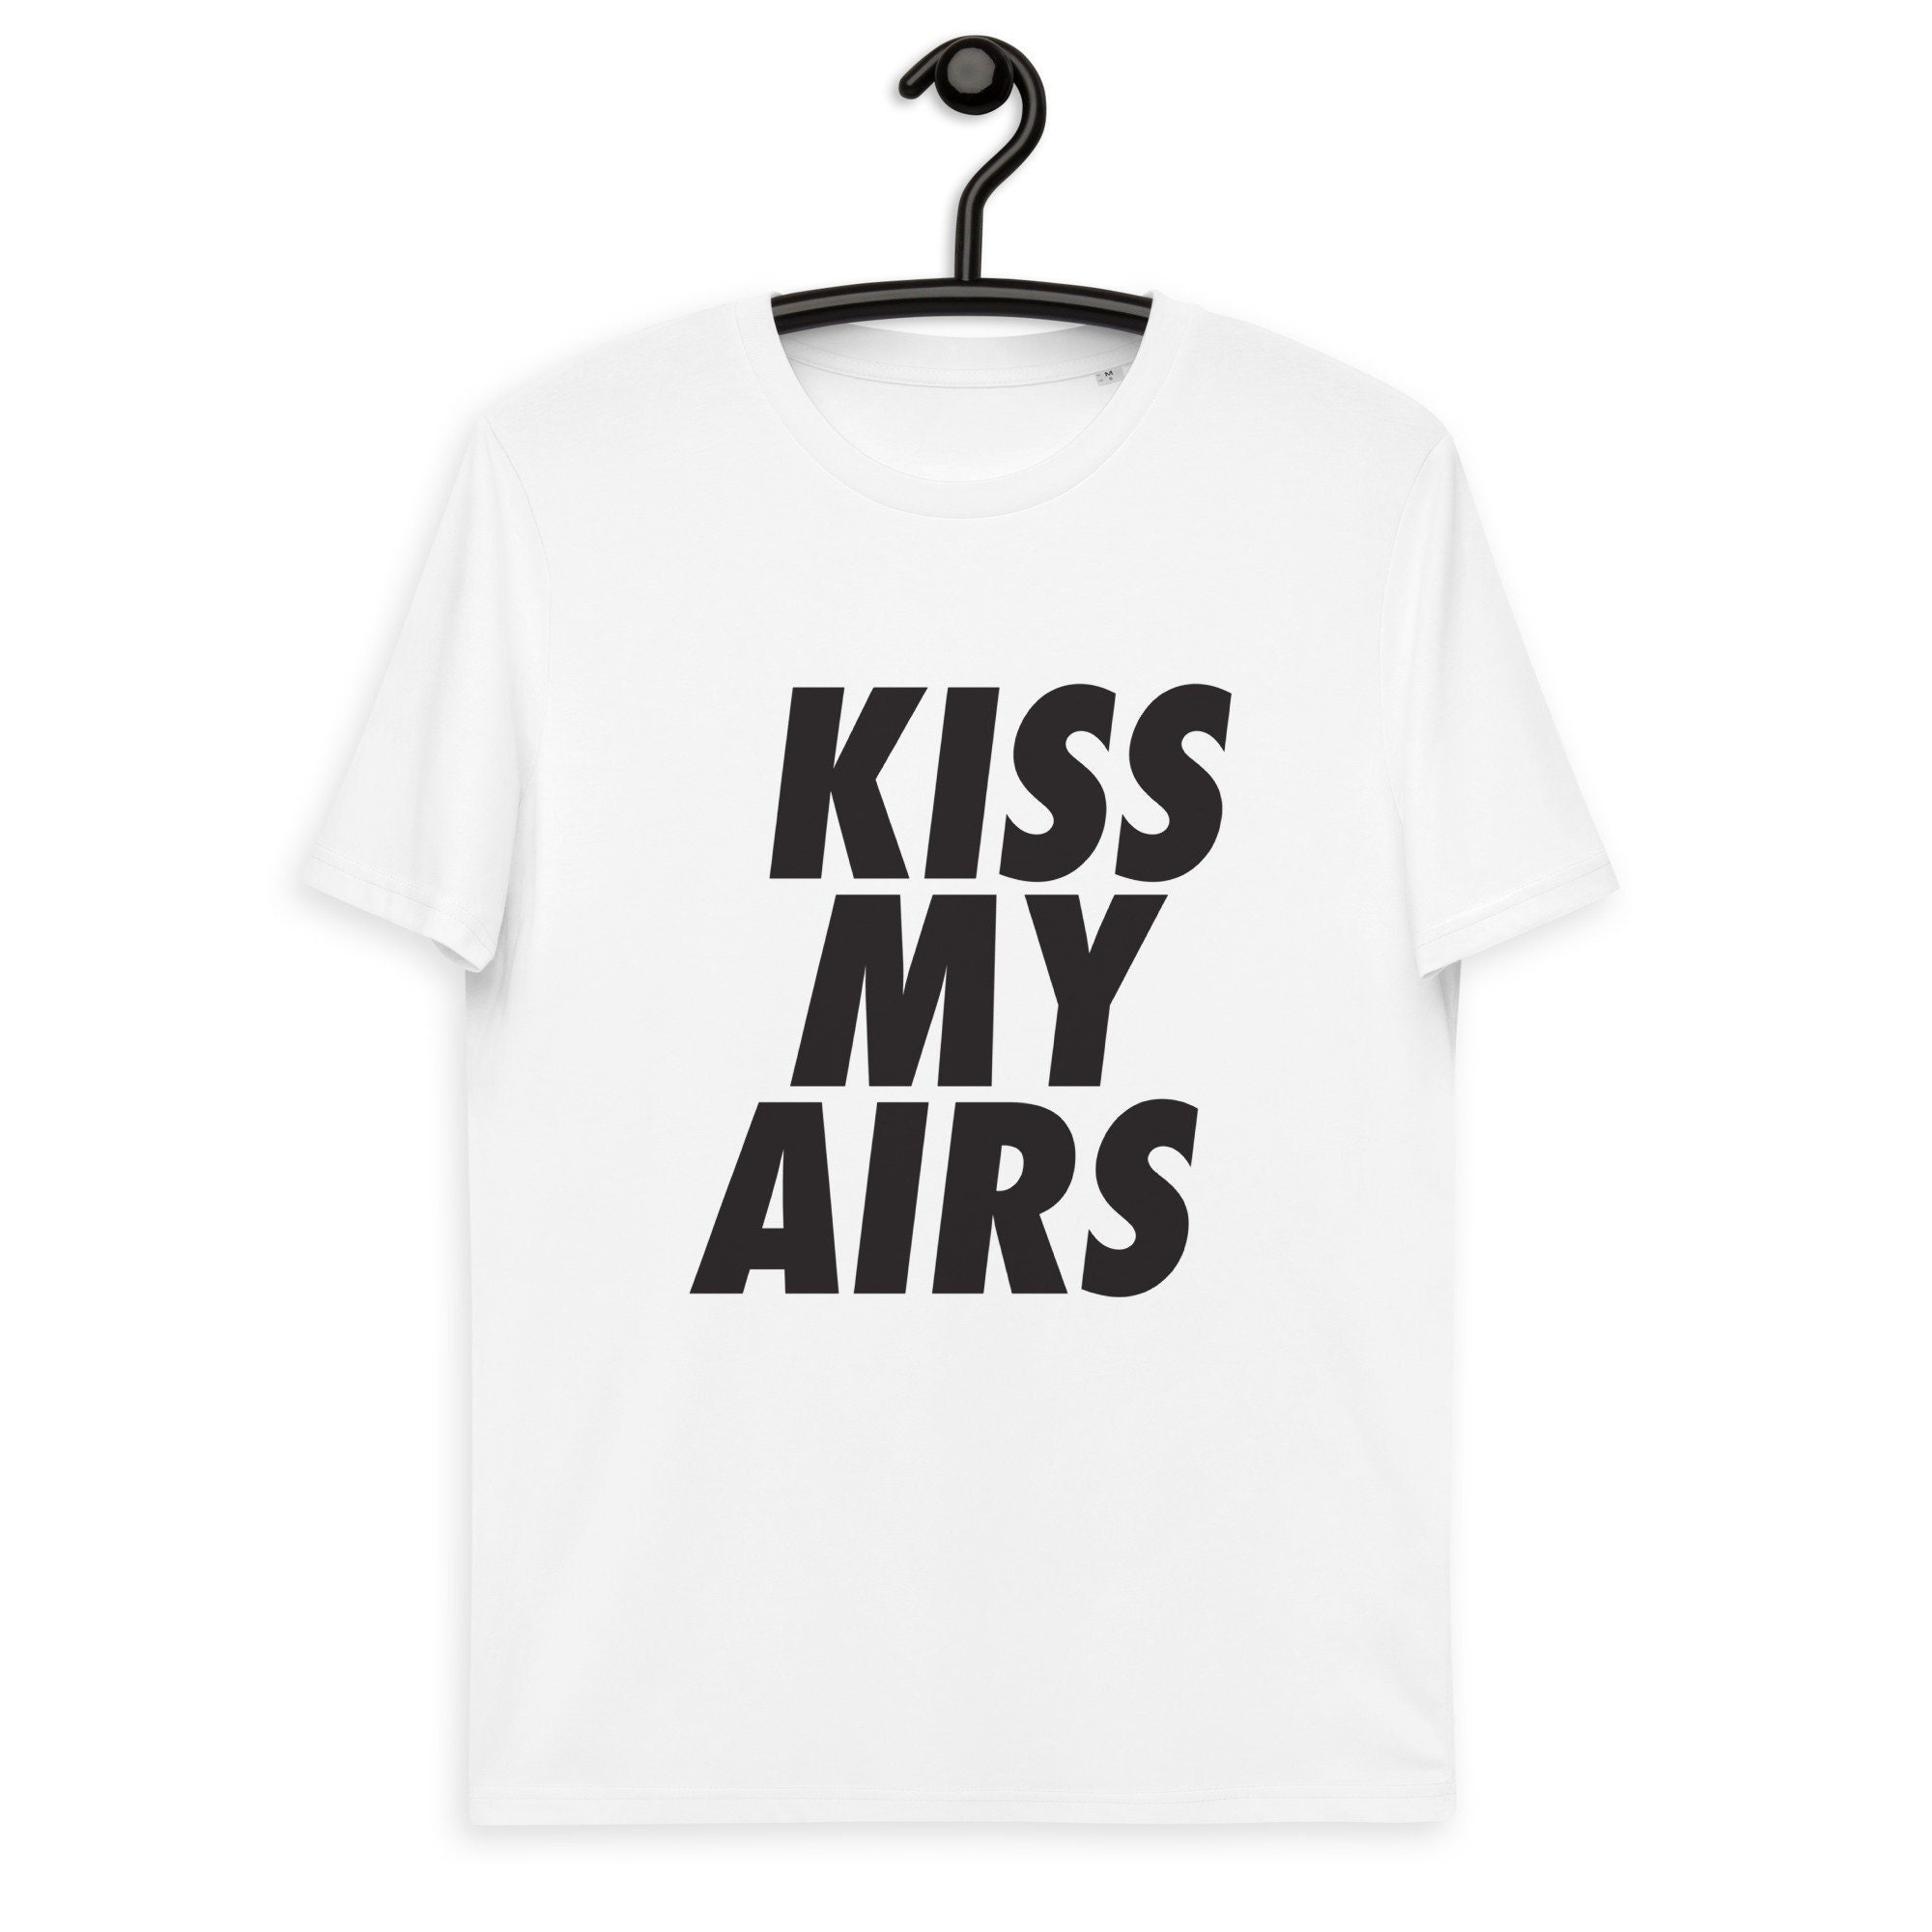 rundvlees levering Londen KISS MY AIRS Unisex T-shirt in Organic Cotton - Etsy